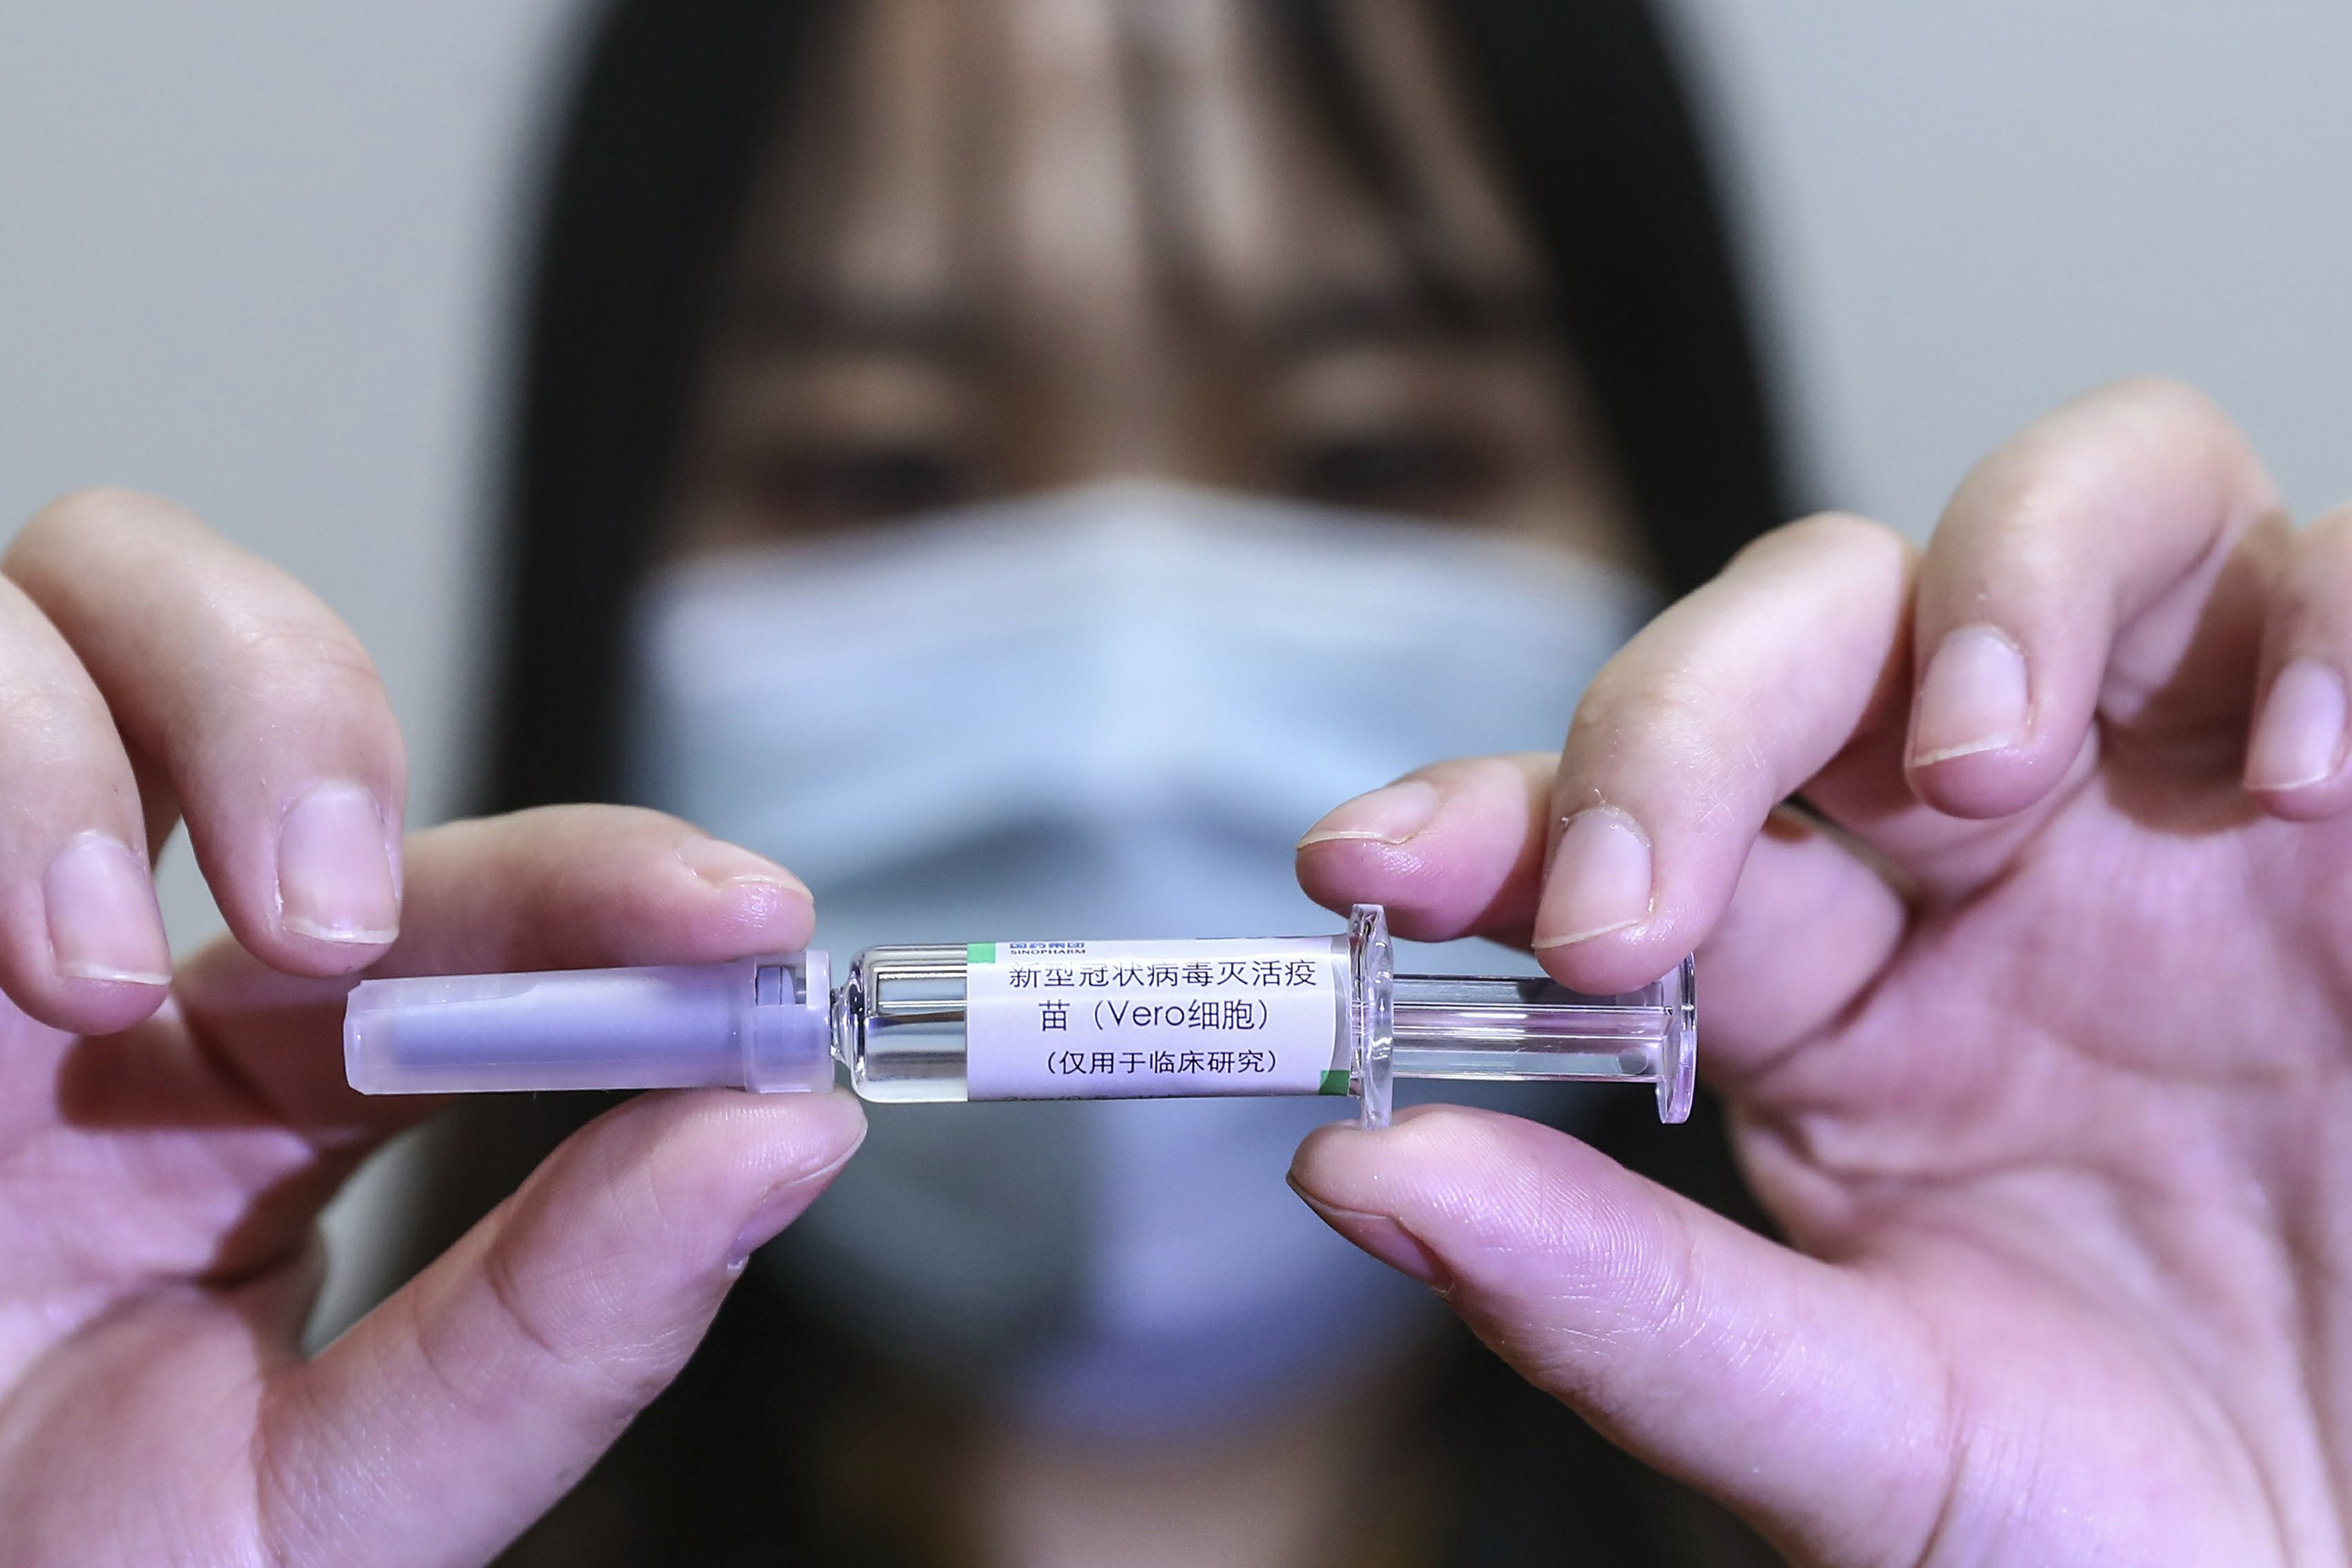 Chinese executives get 'pre-test' injections in vaccine race